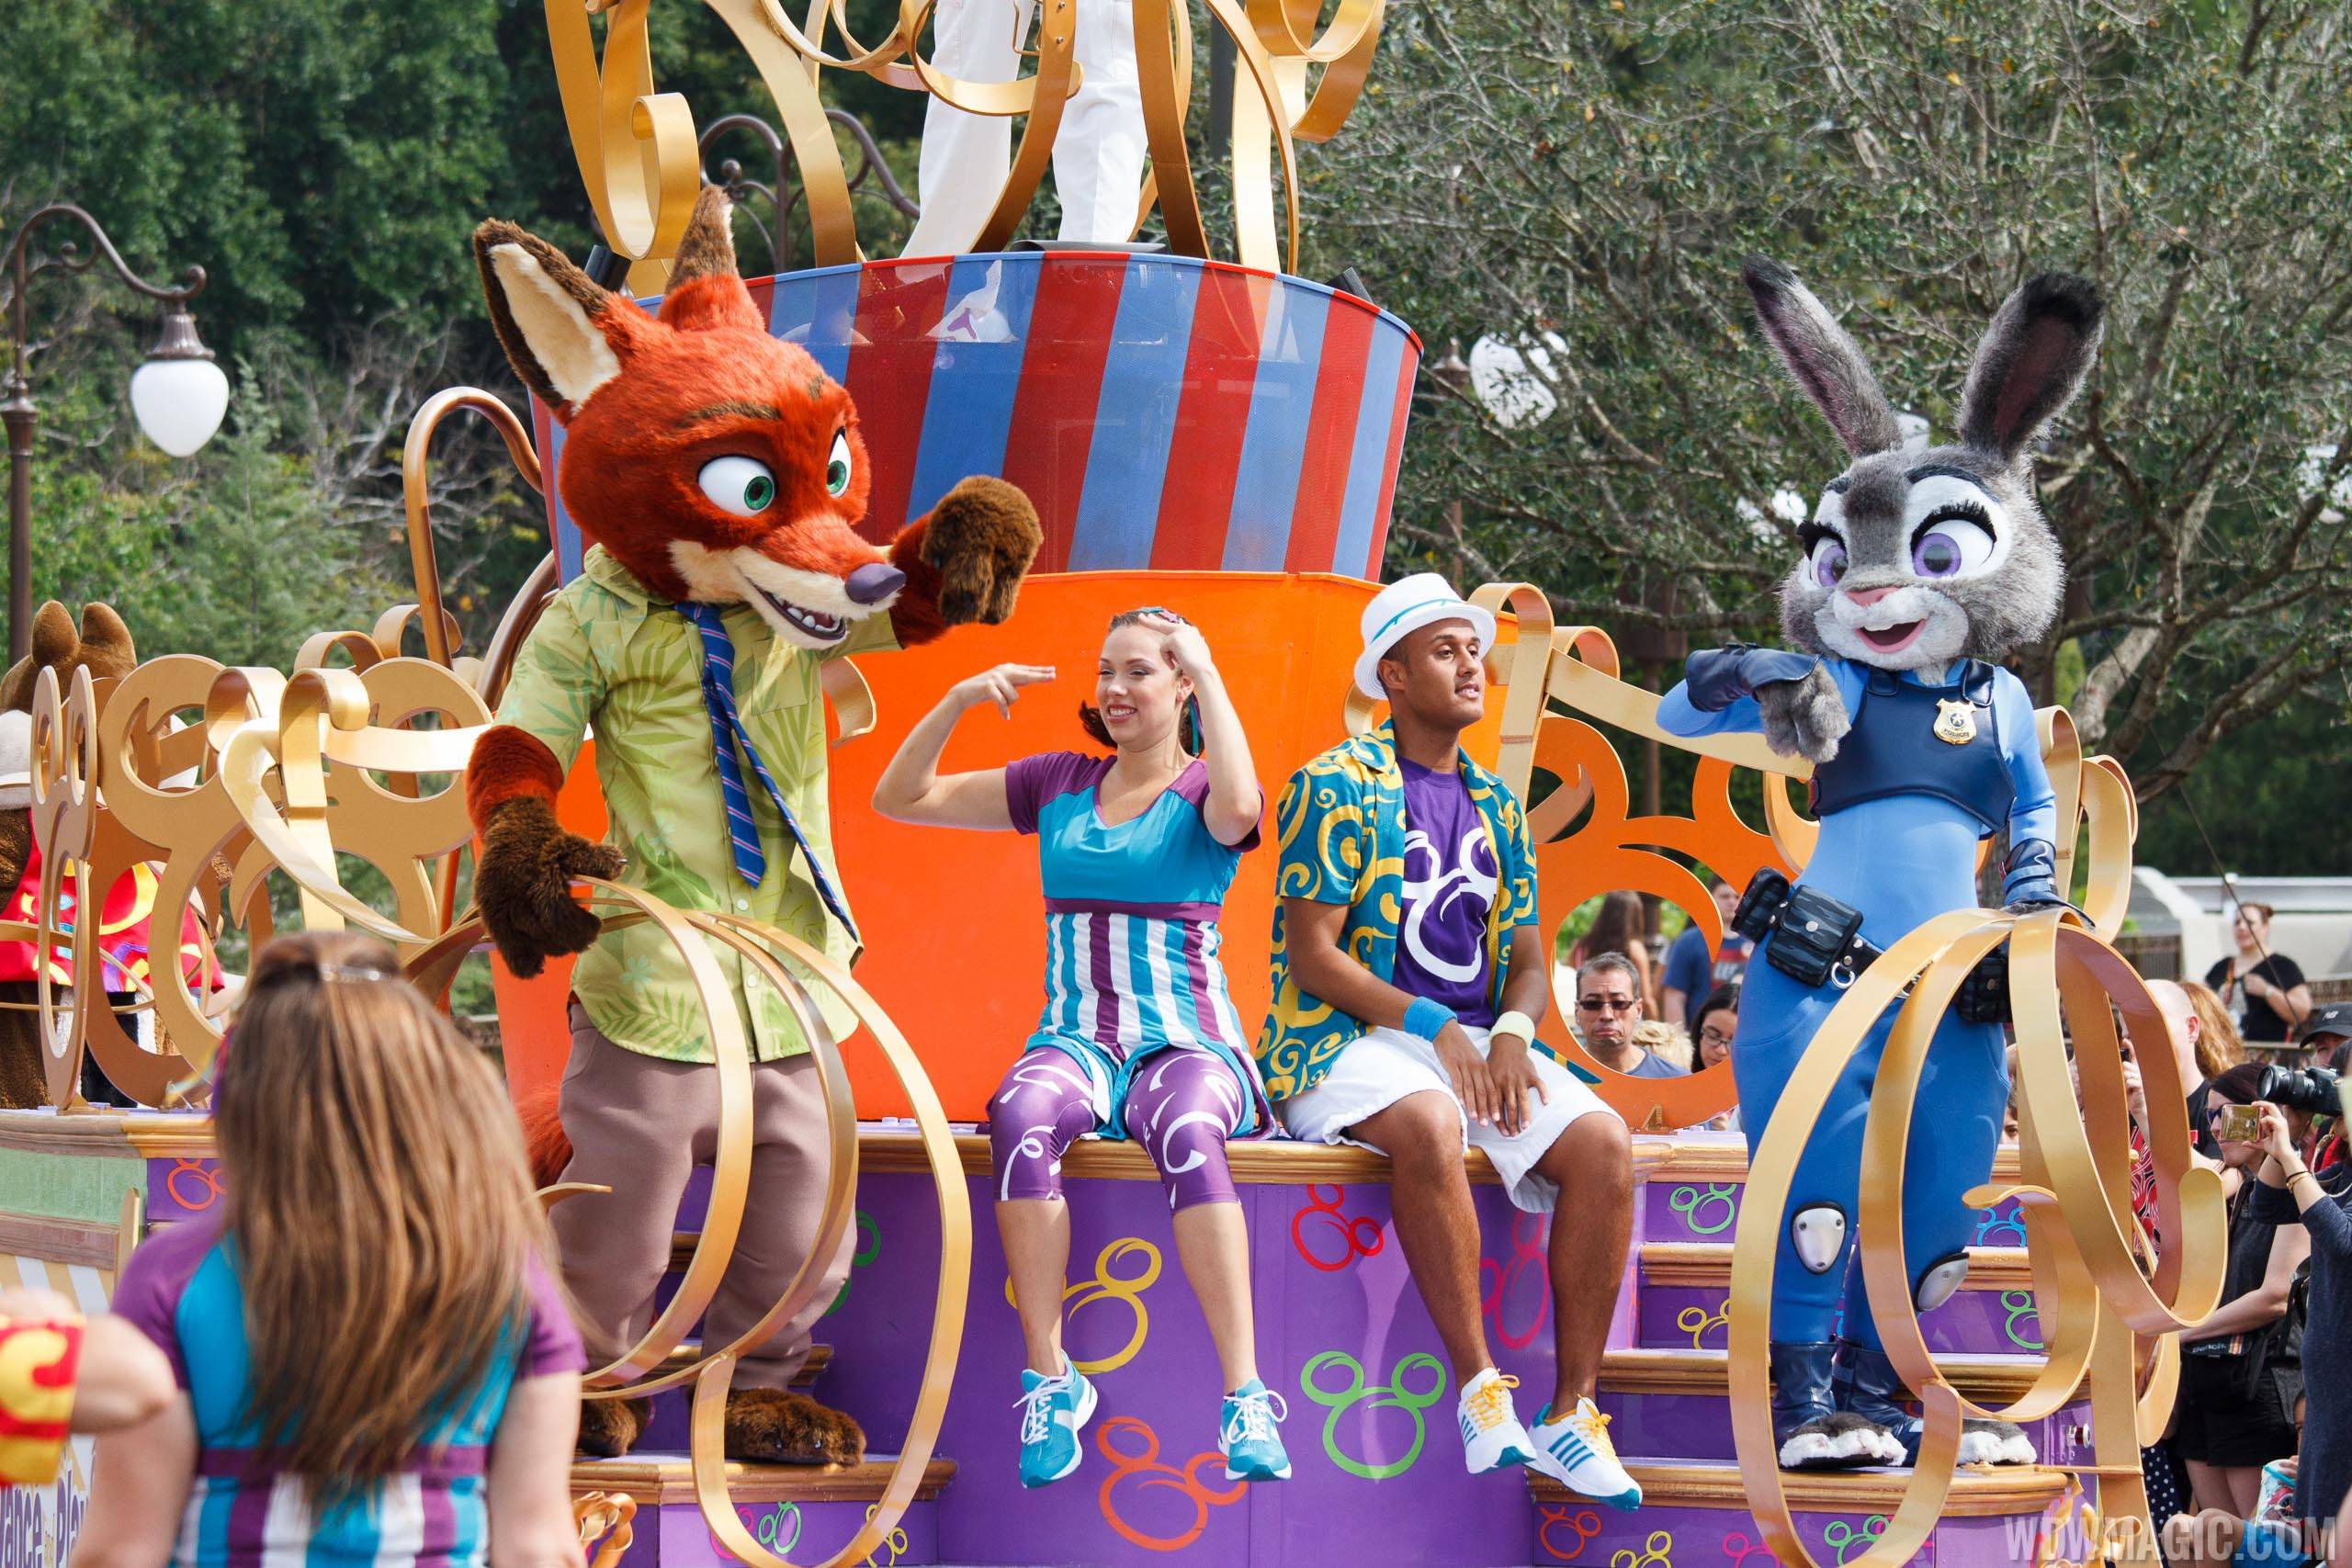 Zootopia joins the Move It! Shake It! Dance and Play It!' Street Party